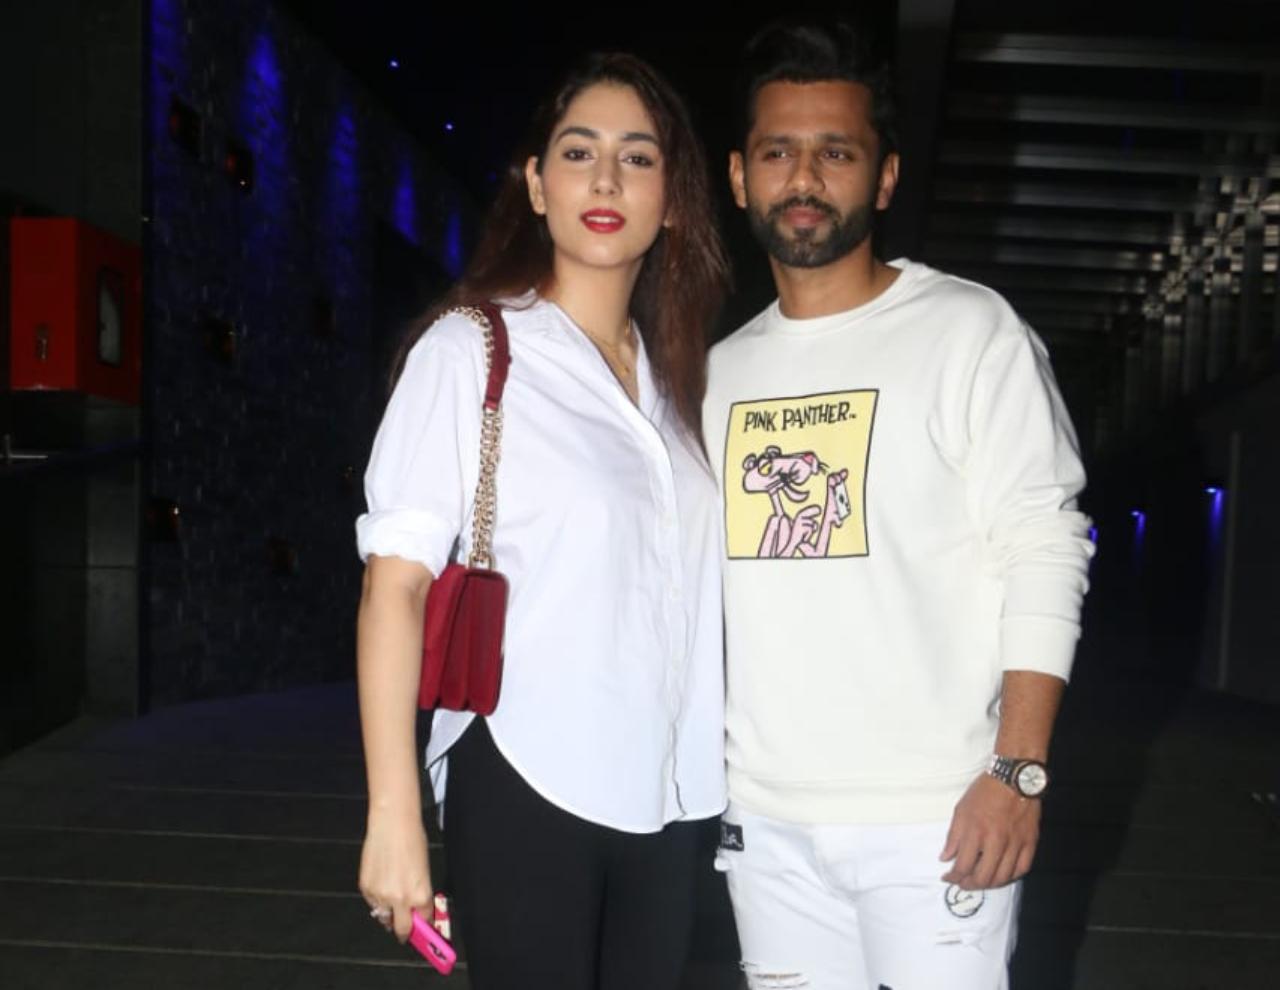 Bigg Boss 14 runner-up Rahul Vaidya was out on a date with his girlfriend Disha Parmar at a popular hangout in Bandra, Mumbai. (All pictures: Yogen Shah).